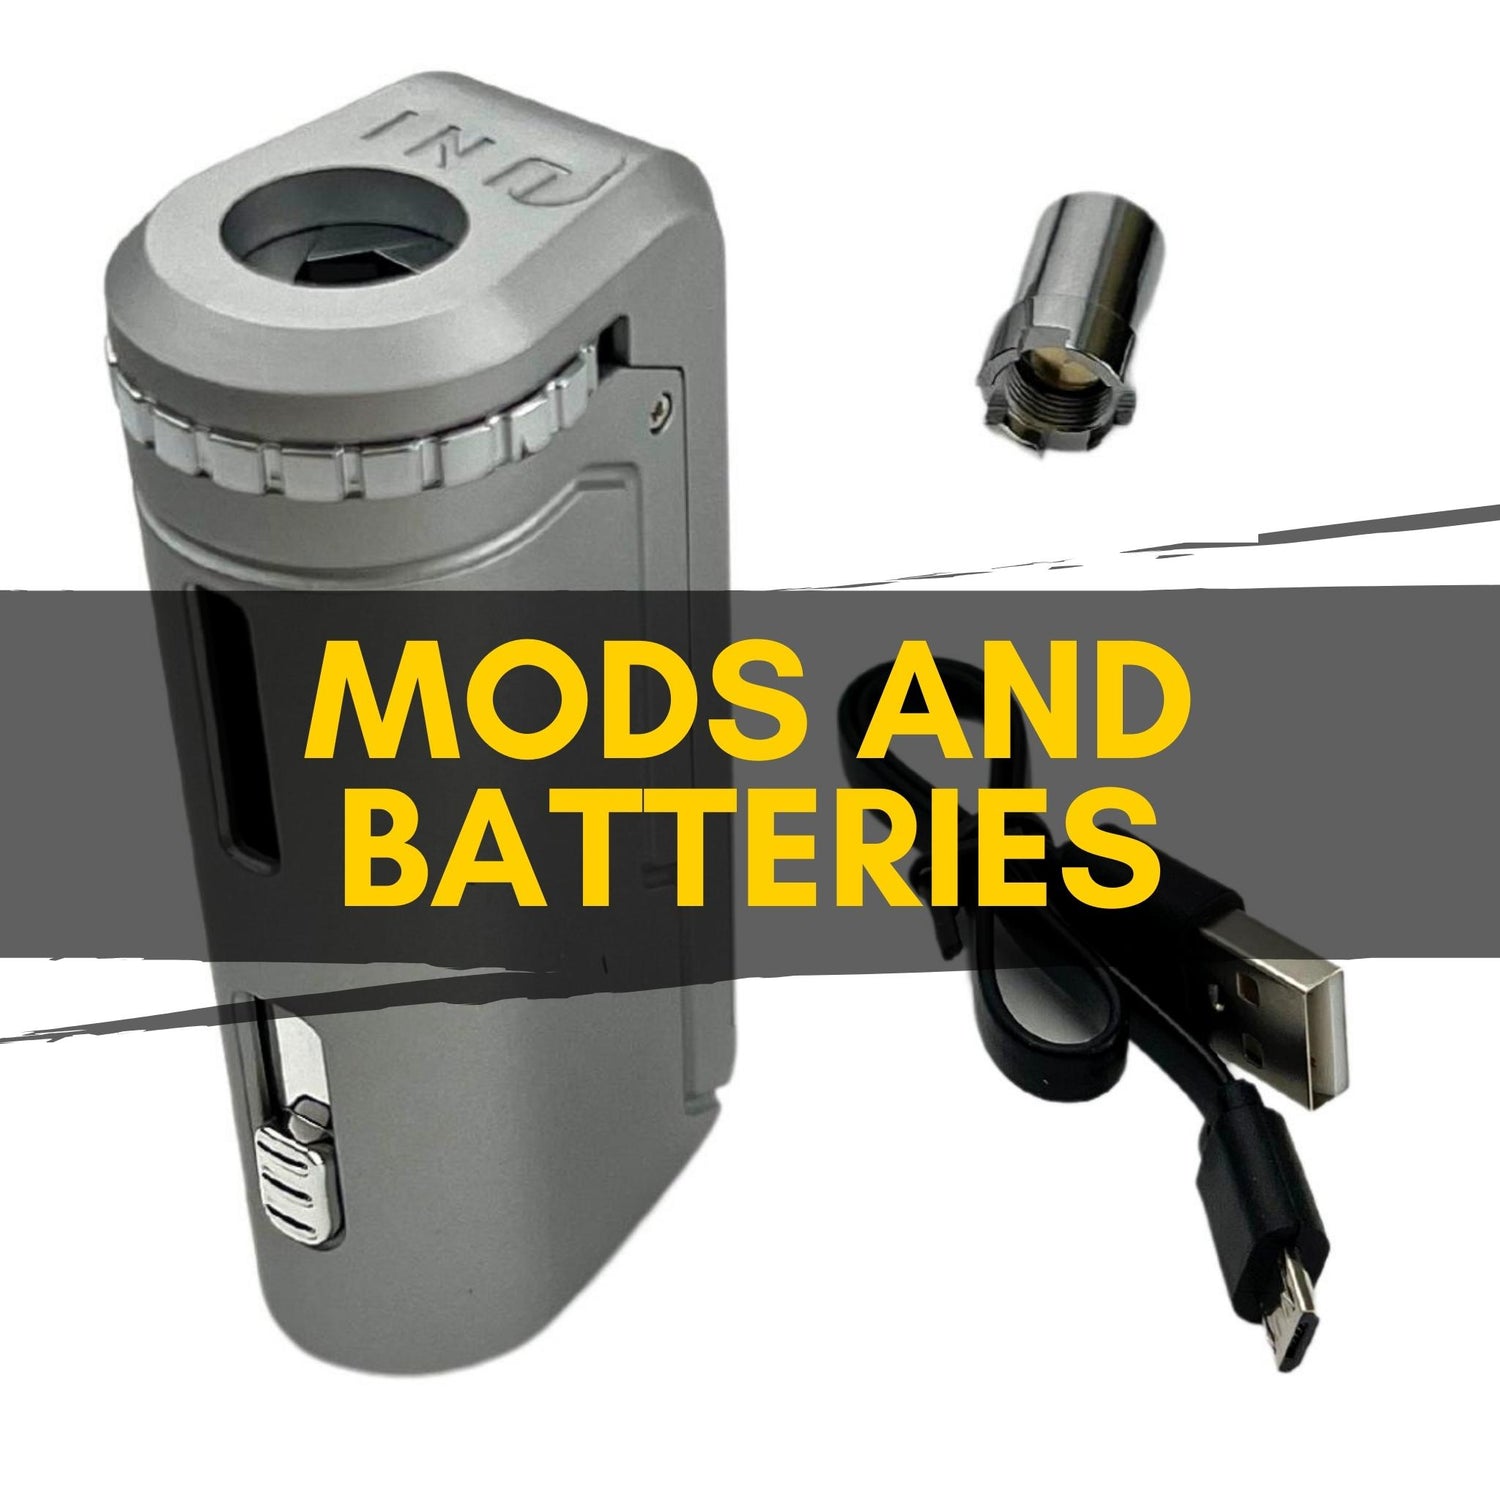 MODS AND BATTERIES